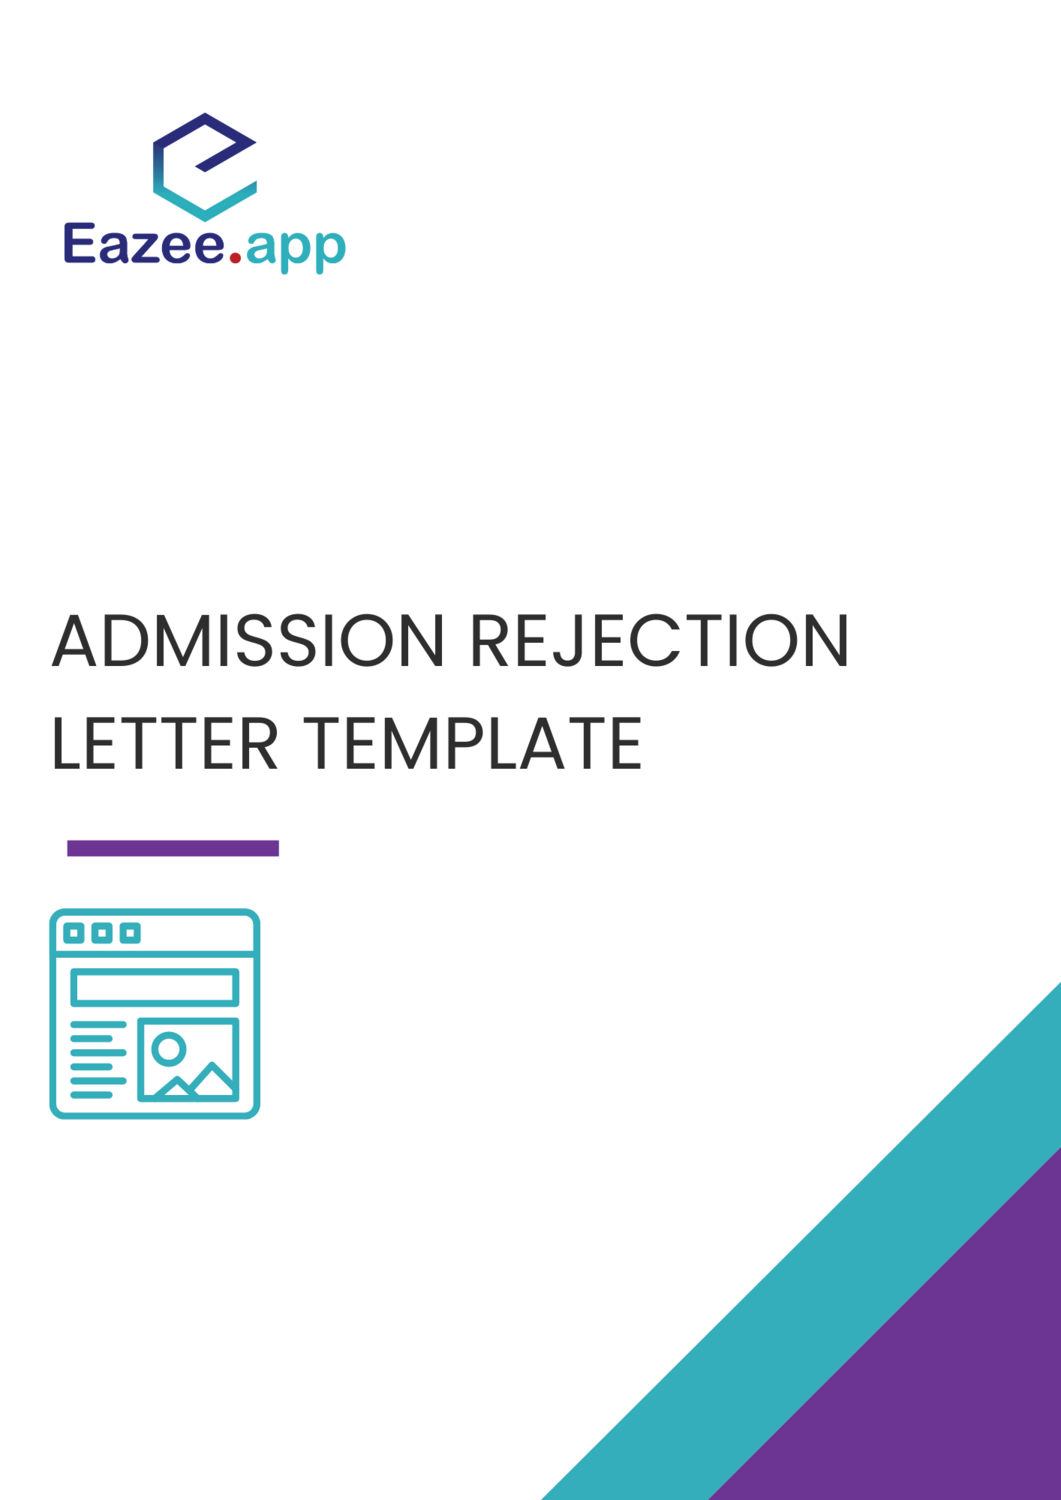 Admission rejection letter template